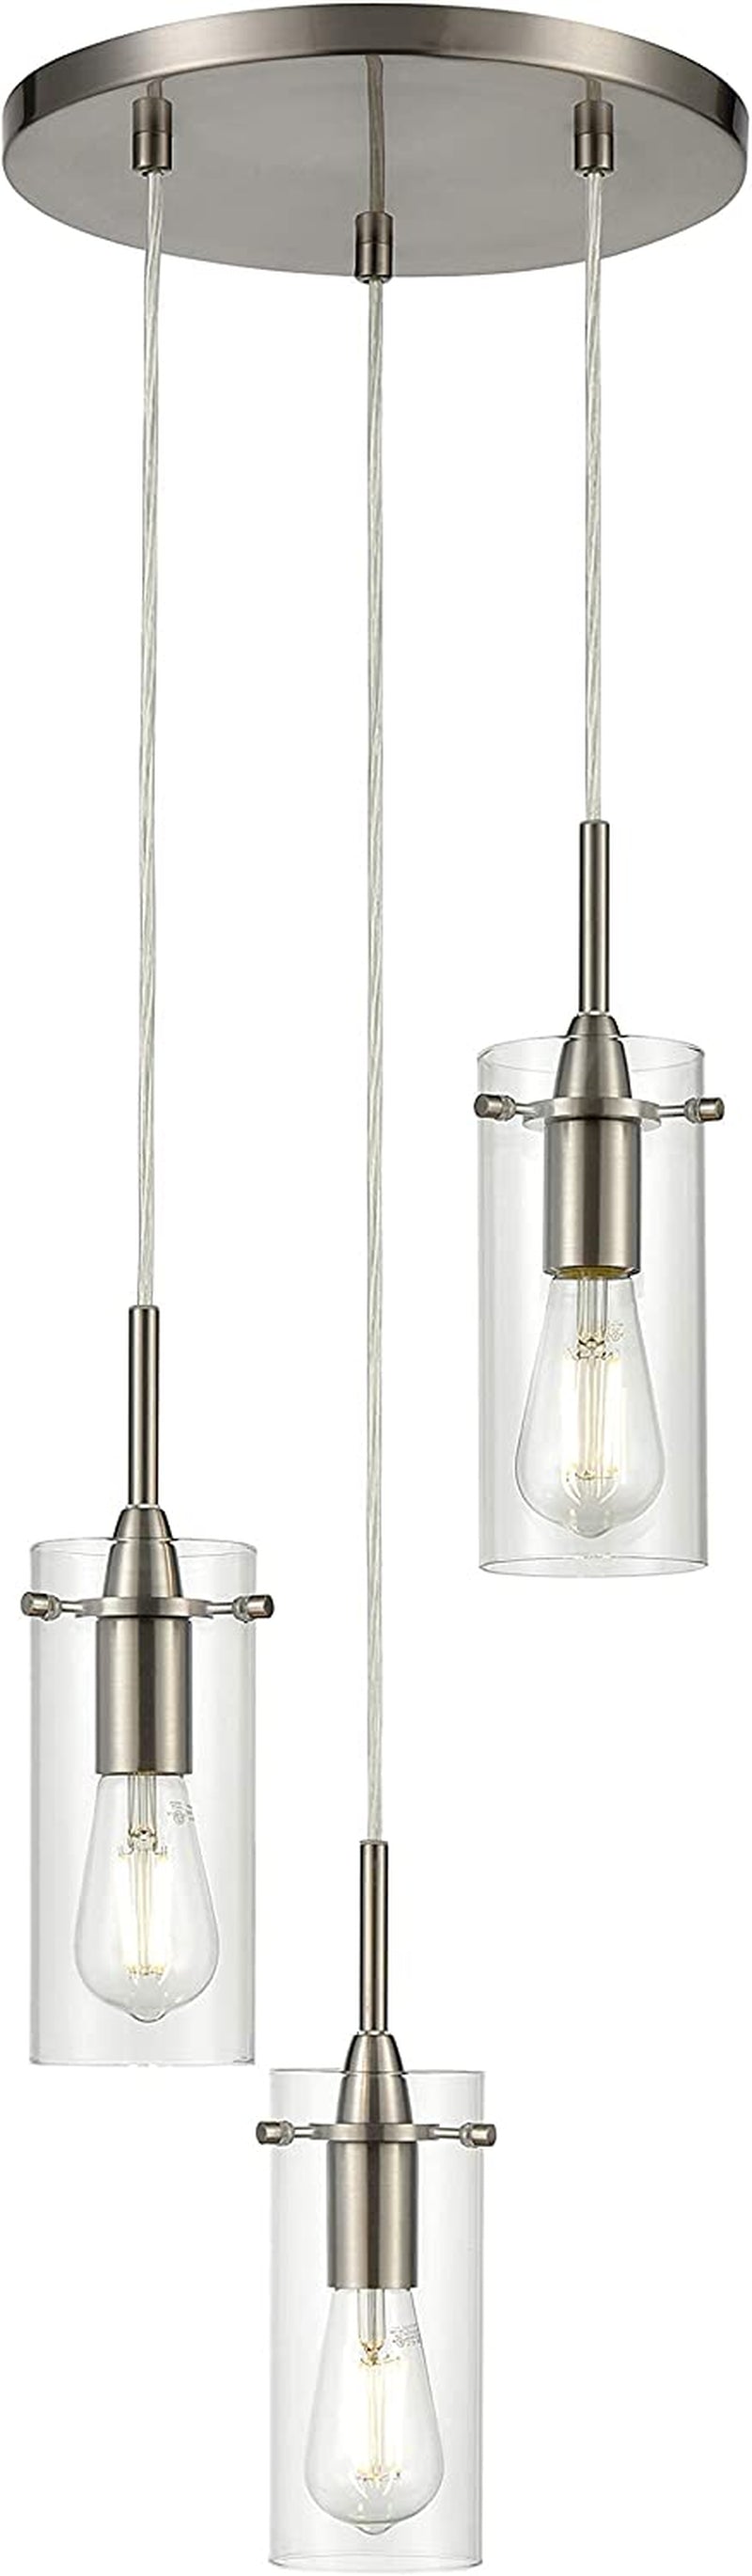 Linea Di Liara Effimero 3-Light Cluster Pendant Lights Stairwell Lighting Small Chandelier Brushed Nickel Modern Chandelier Light Fixture Foyer Chandeliers Entryway High Ceiling Staircase Lights